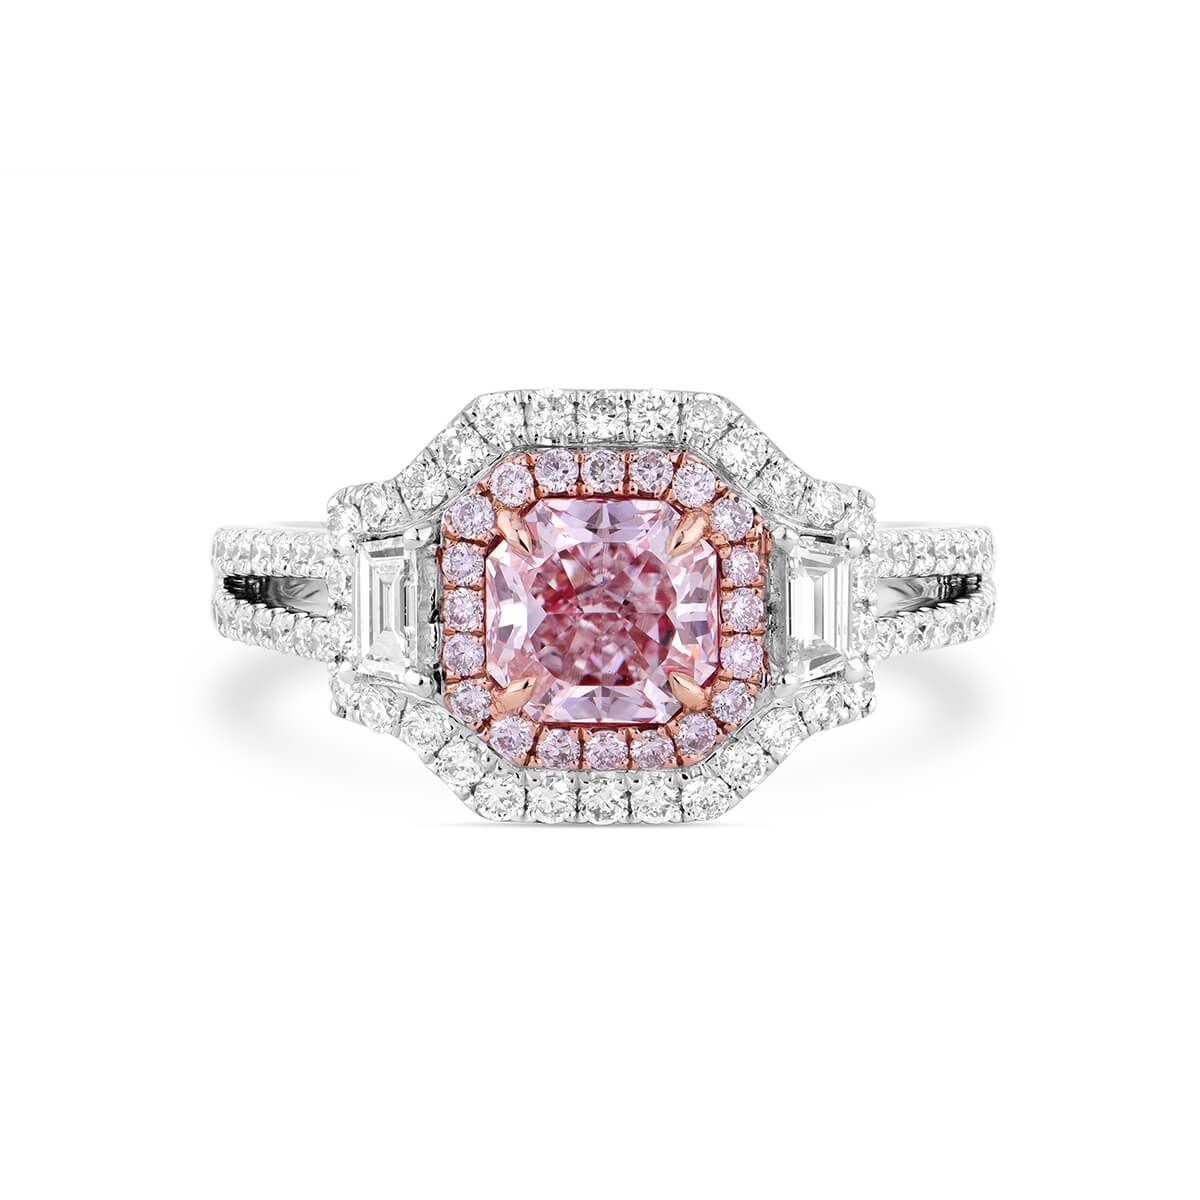 Very Light Pink Diamond Ring, 0.87 Ct. (1.59 Ct. TW), Radiant shape, GIA Certified, 2234660534